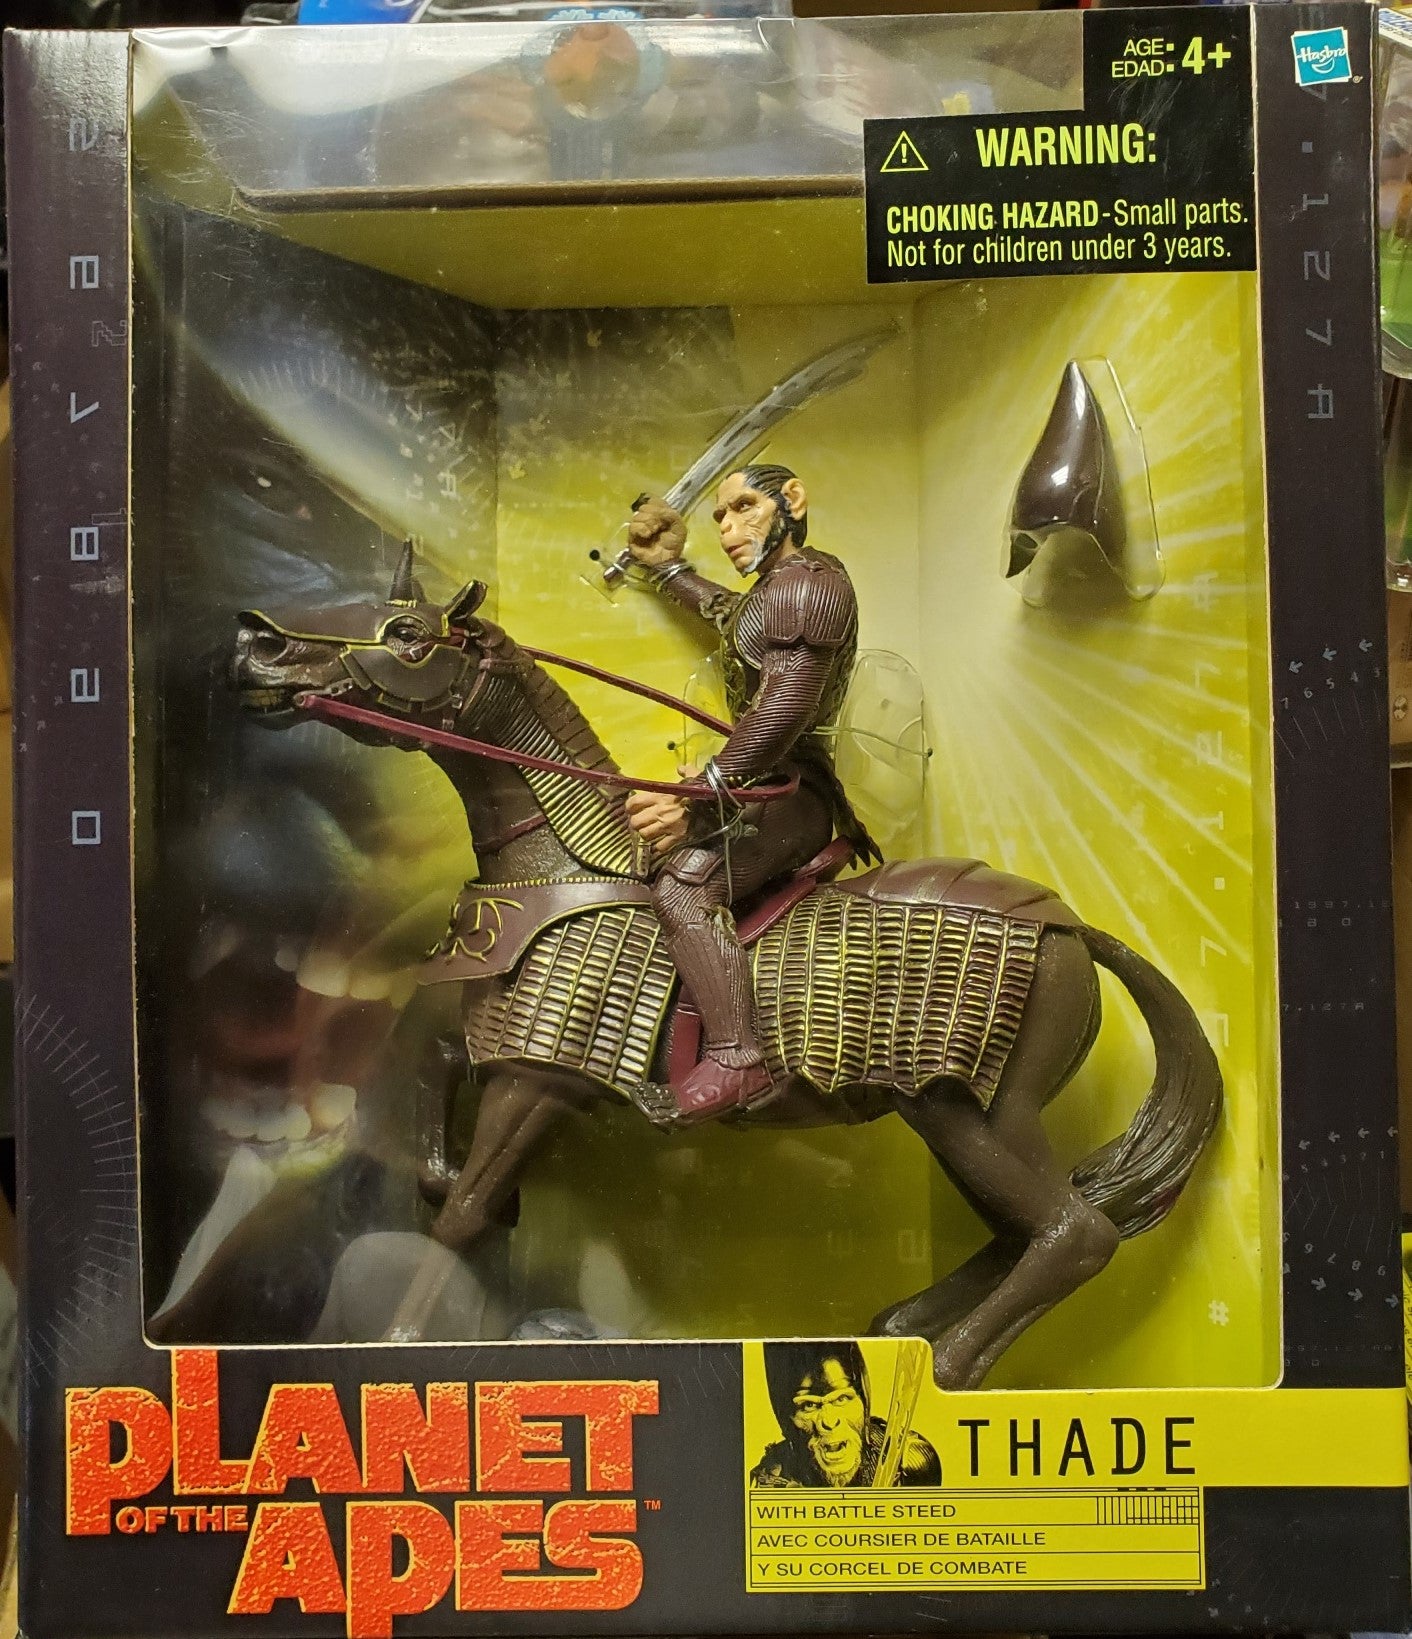 Planet of the Apes 2001 movie THADE with Battle Steed action figure